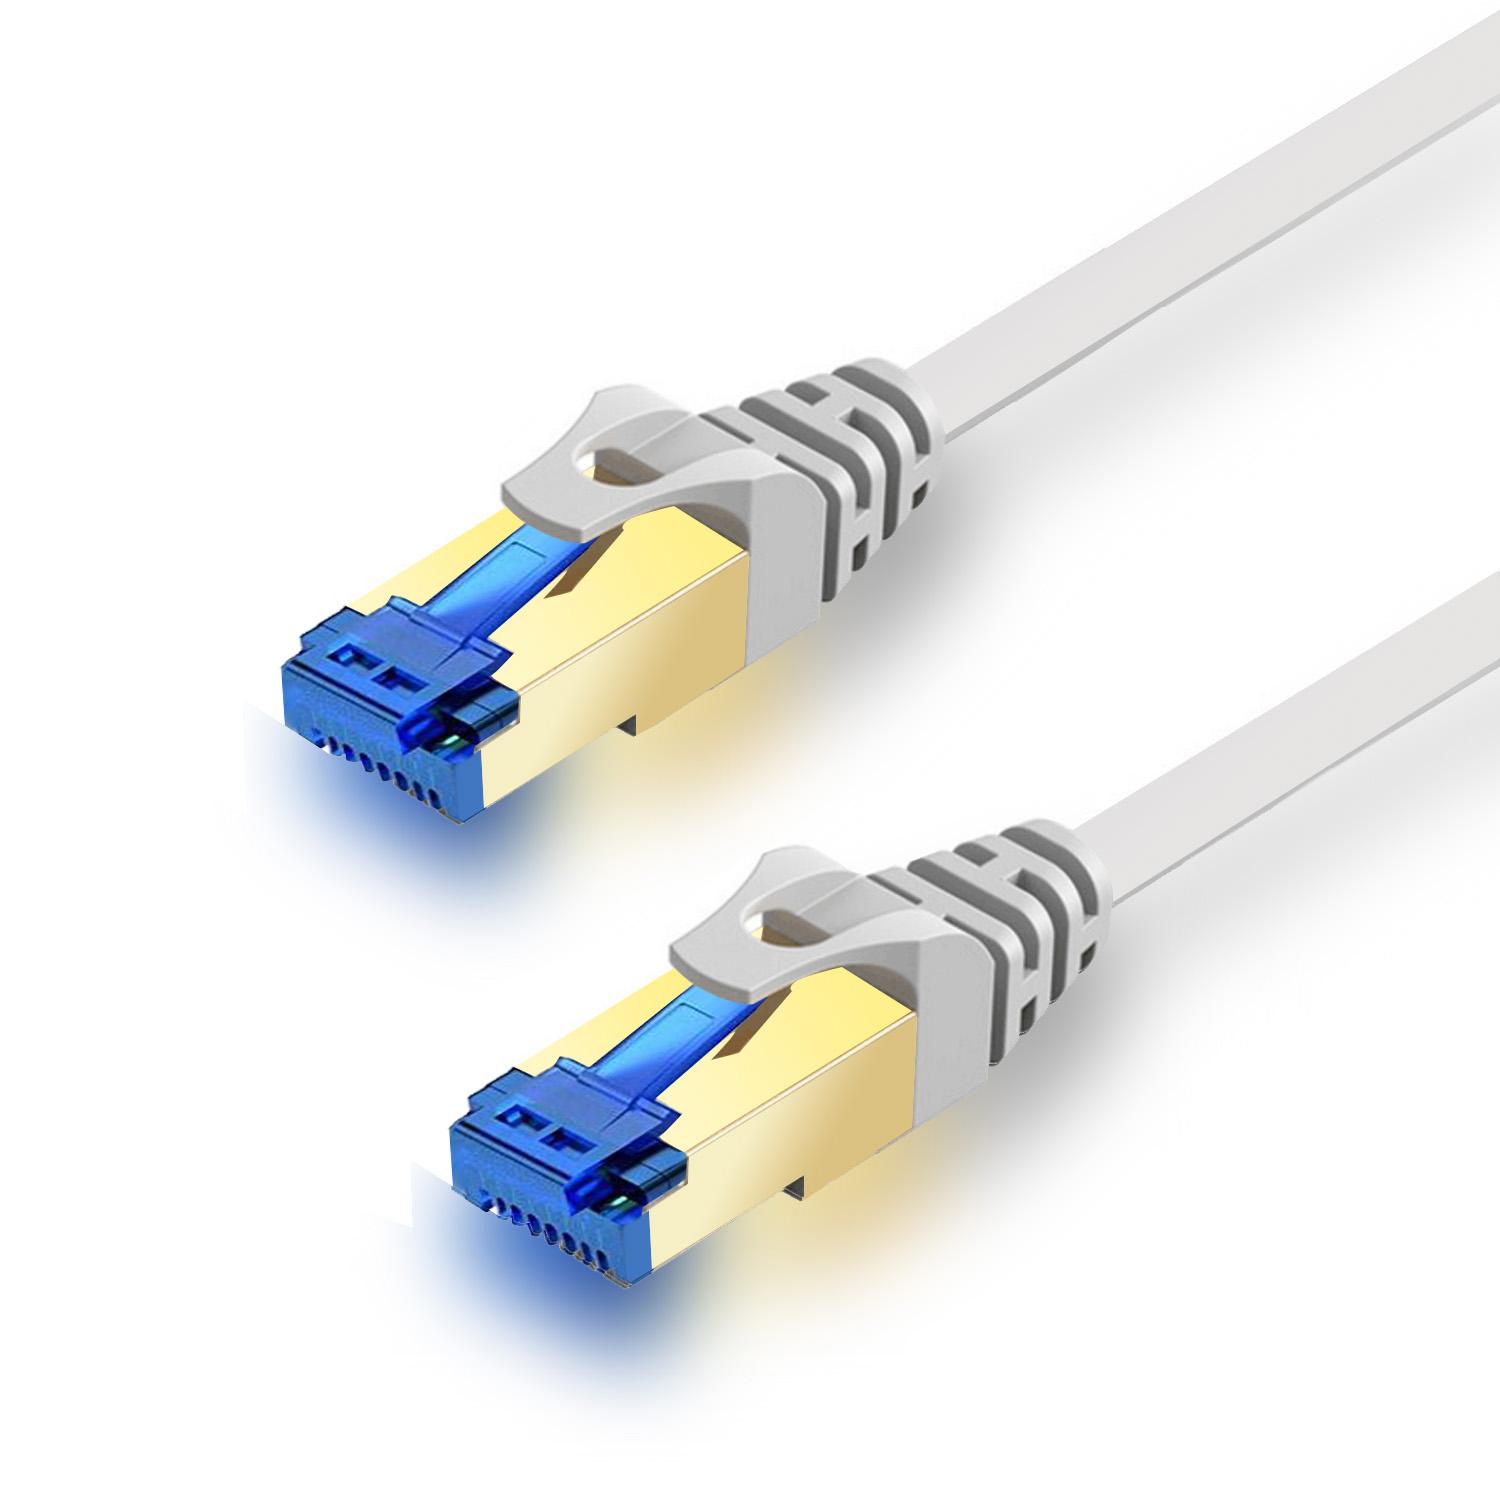 Annnwzzd 3ft 100ft Flat Cat7 Ethernet Cable Ultra Thin Design Rj45 ...